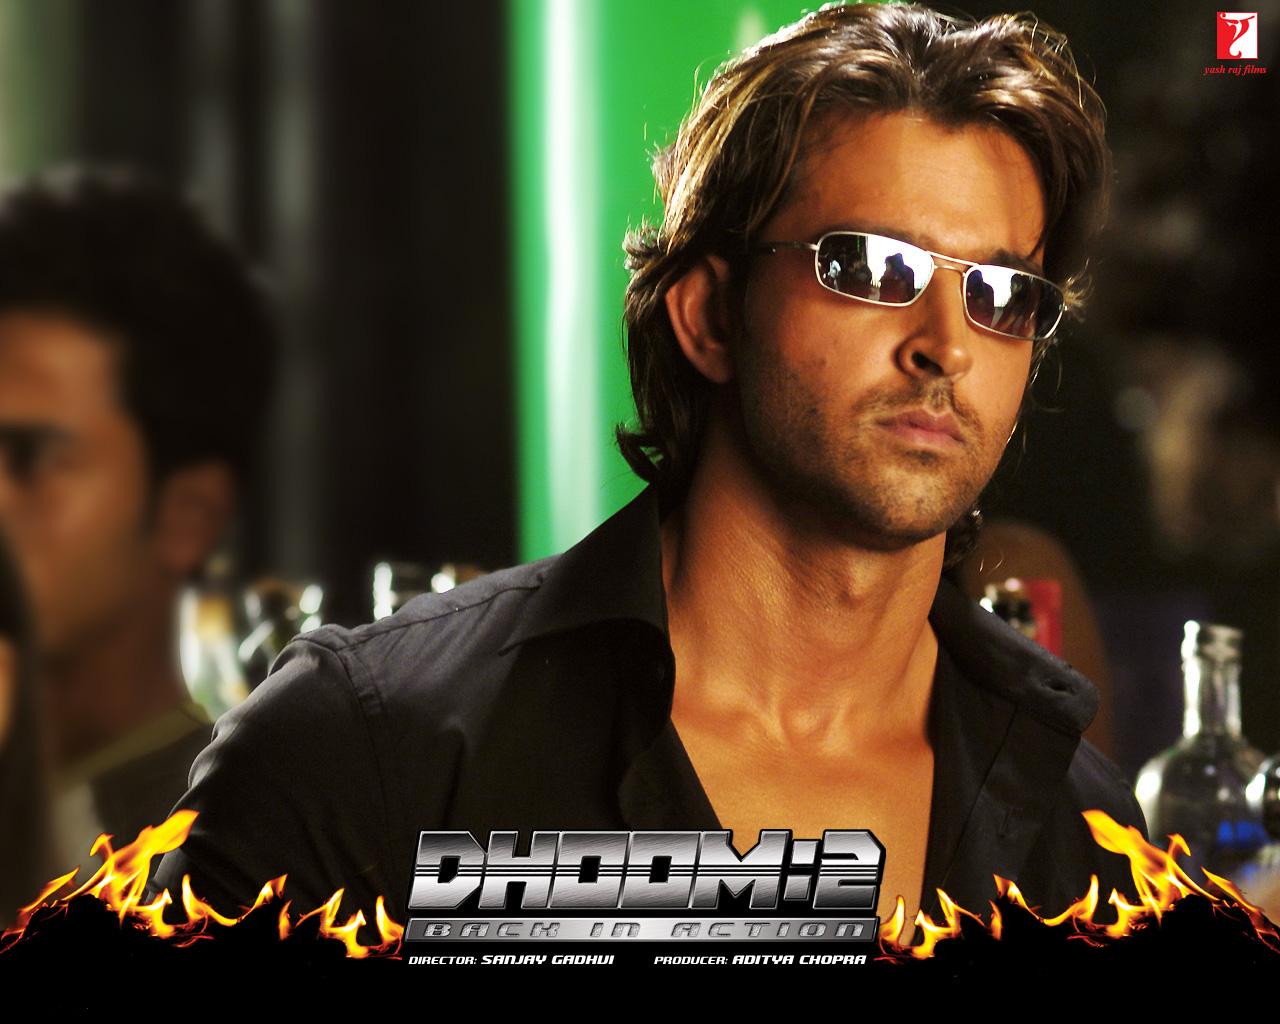 Download Free HD Wallpapers Of Hrithik Roshan Download Free HD